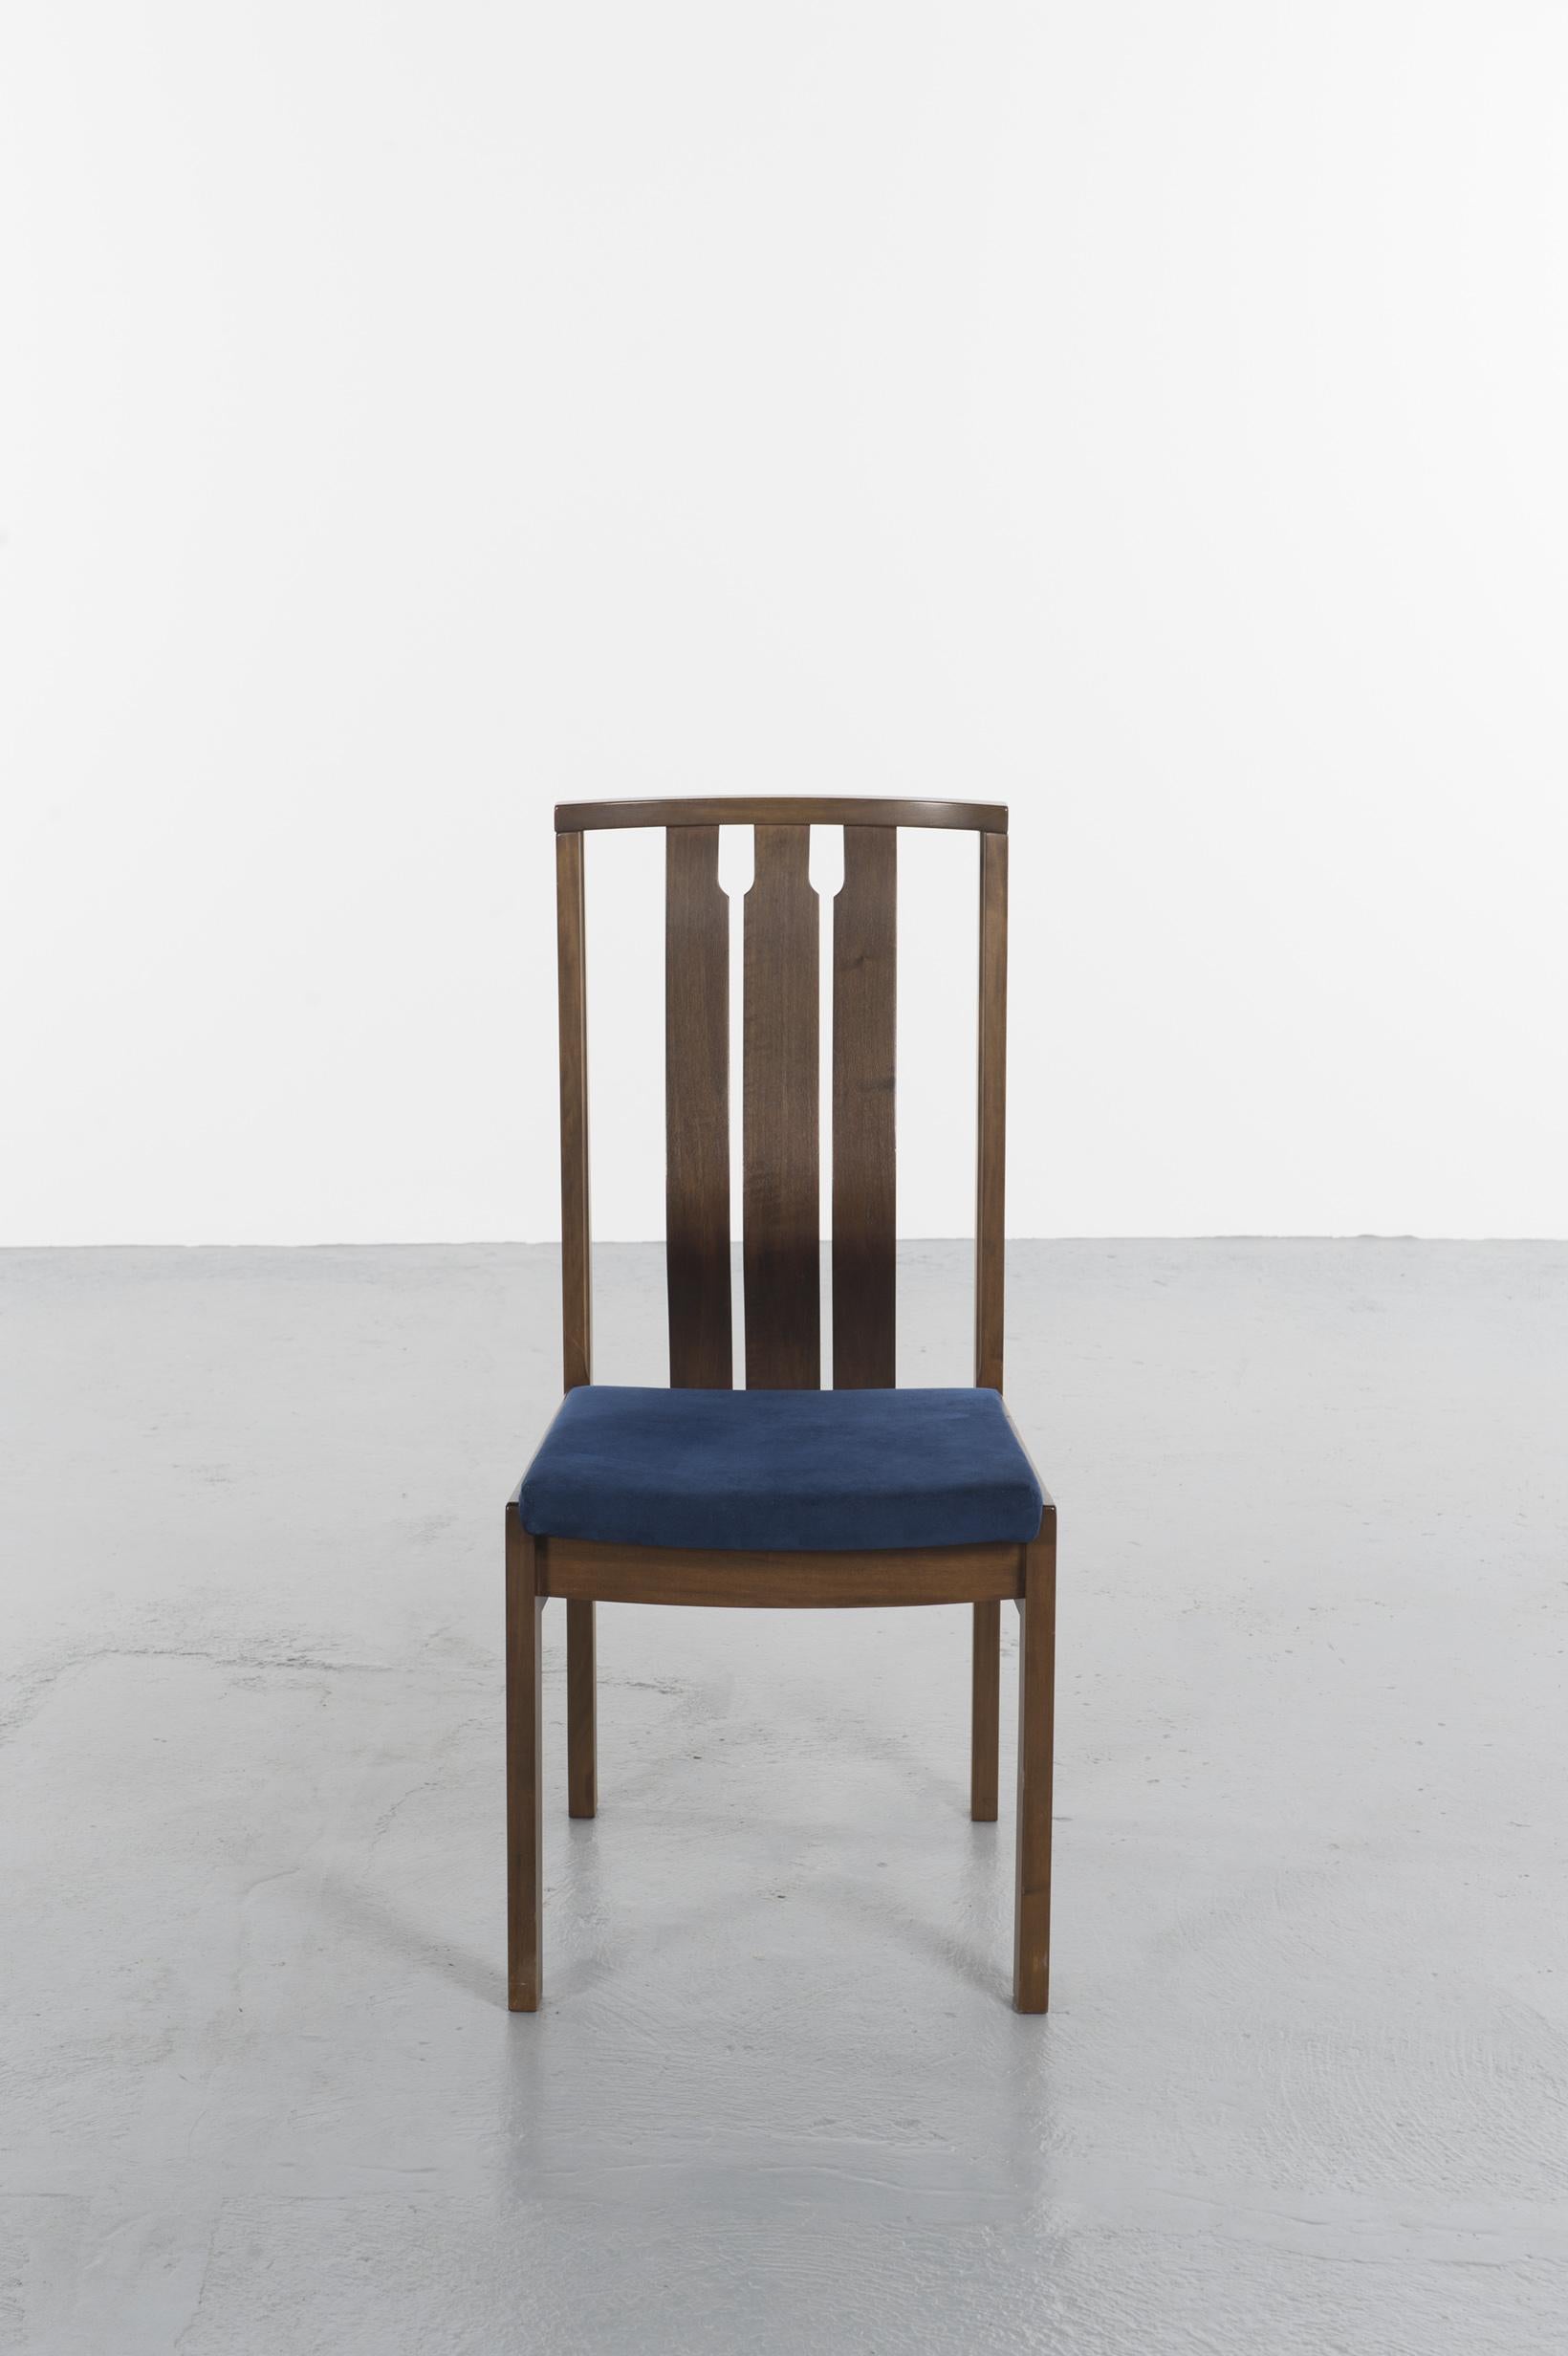 8 dining chairs of Danish design dated 1960s in walnut and blue velvet. In the style of Bovirke furniture.
Modern and classical look, depending on the point of view and accompanying furniture.
The velvet and dark wood create a warm